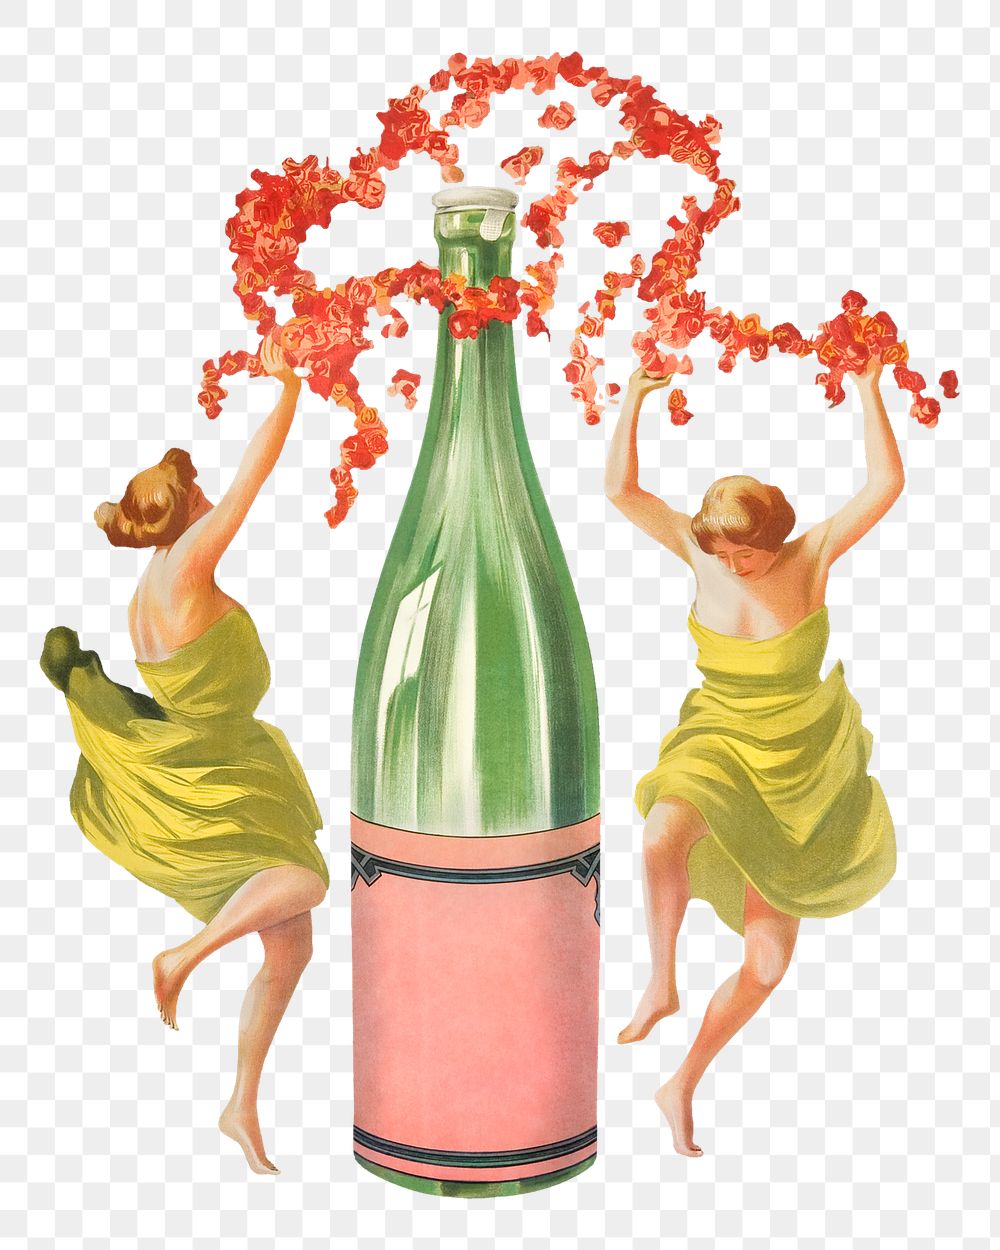 Mineral water bottle png with women illustration, remixed from artworks by Leonetto Cappiello